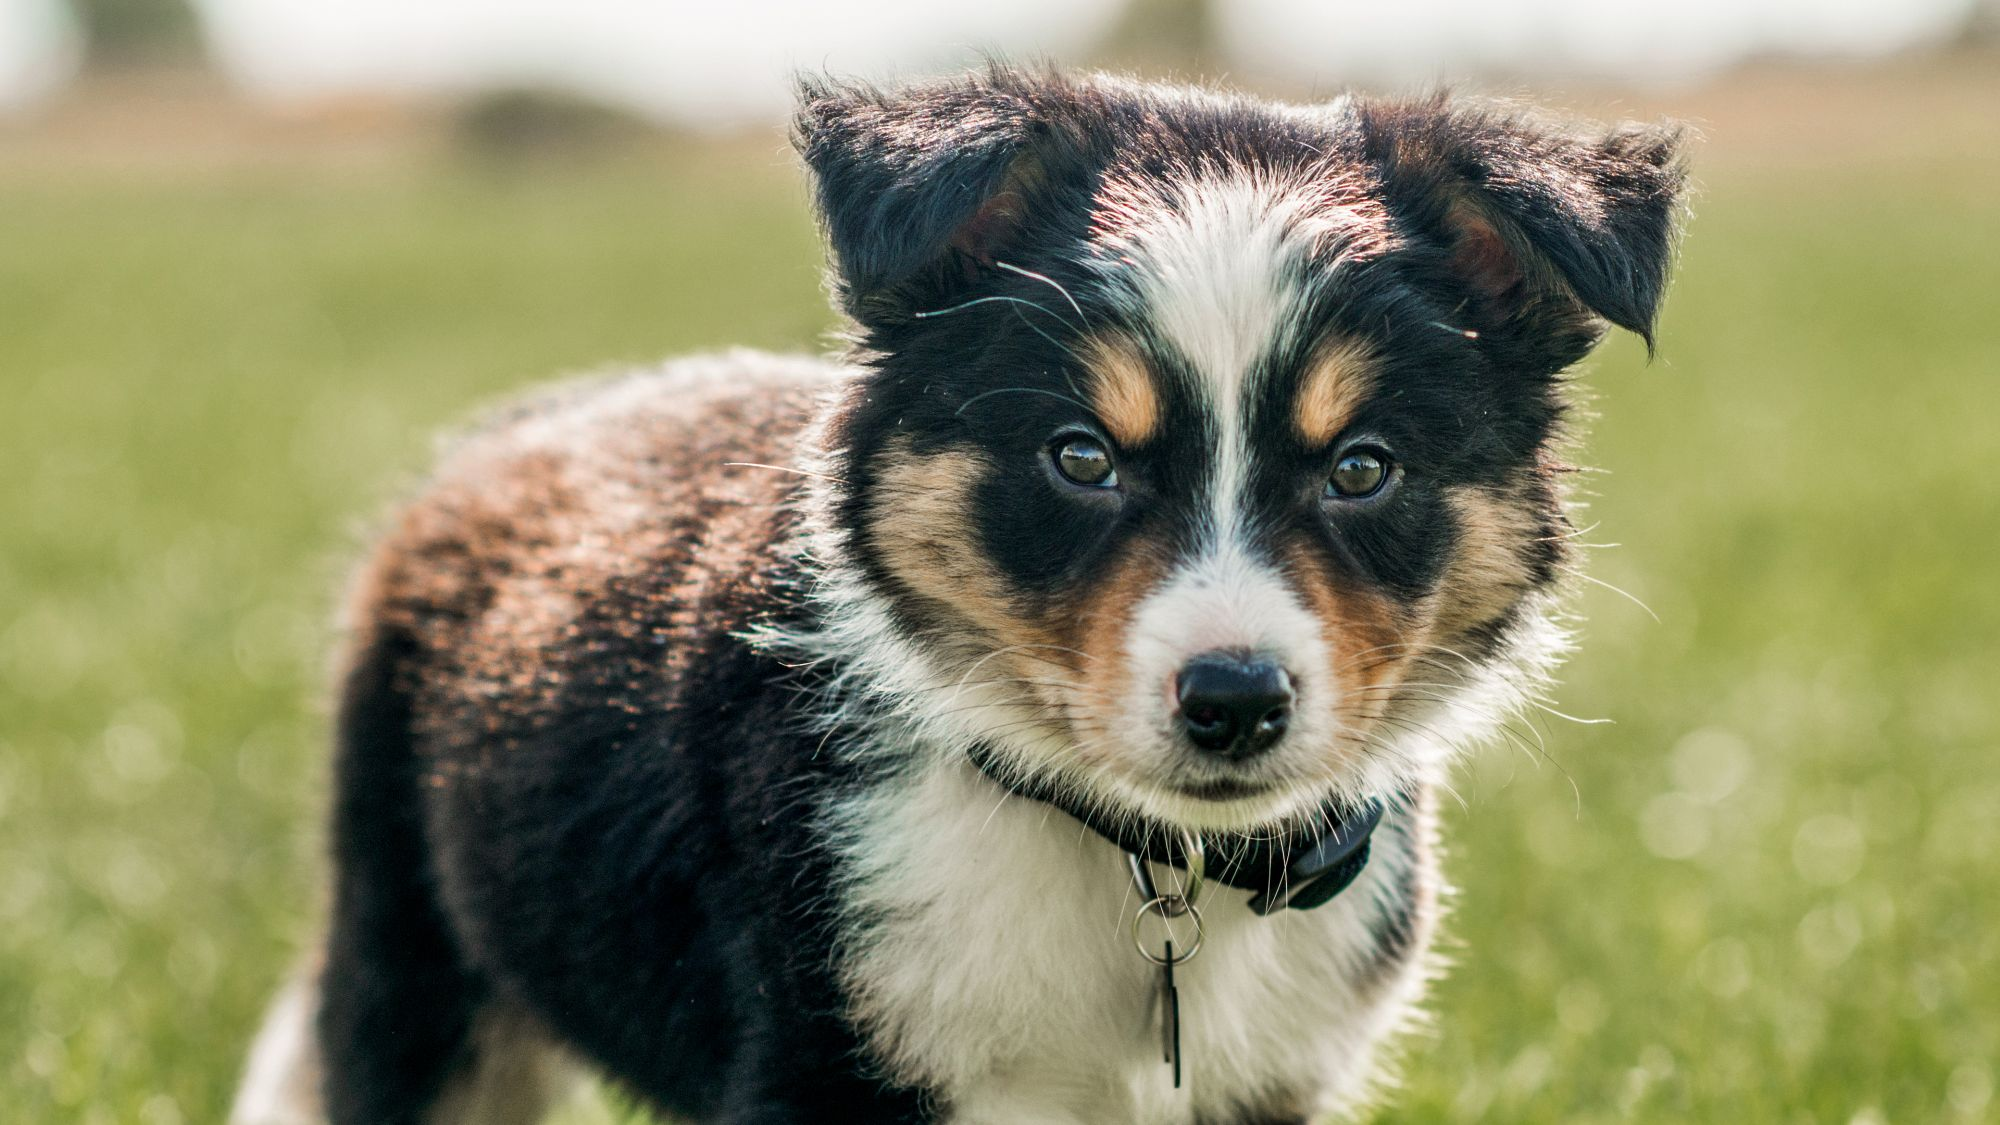 Border Collie puppy standing outdoors in grass